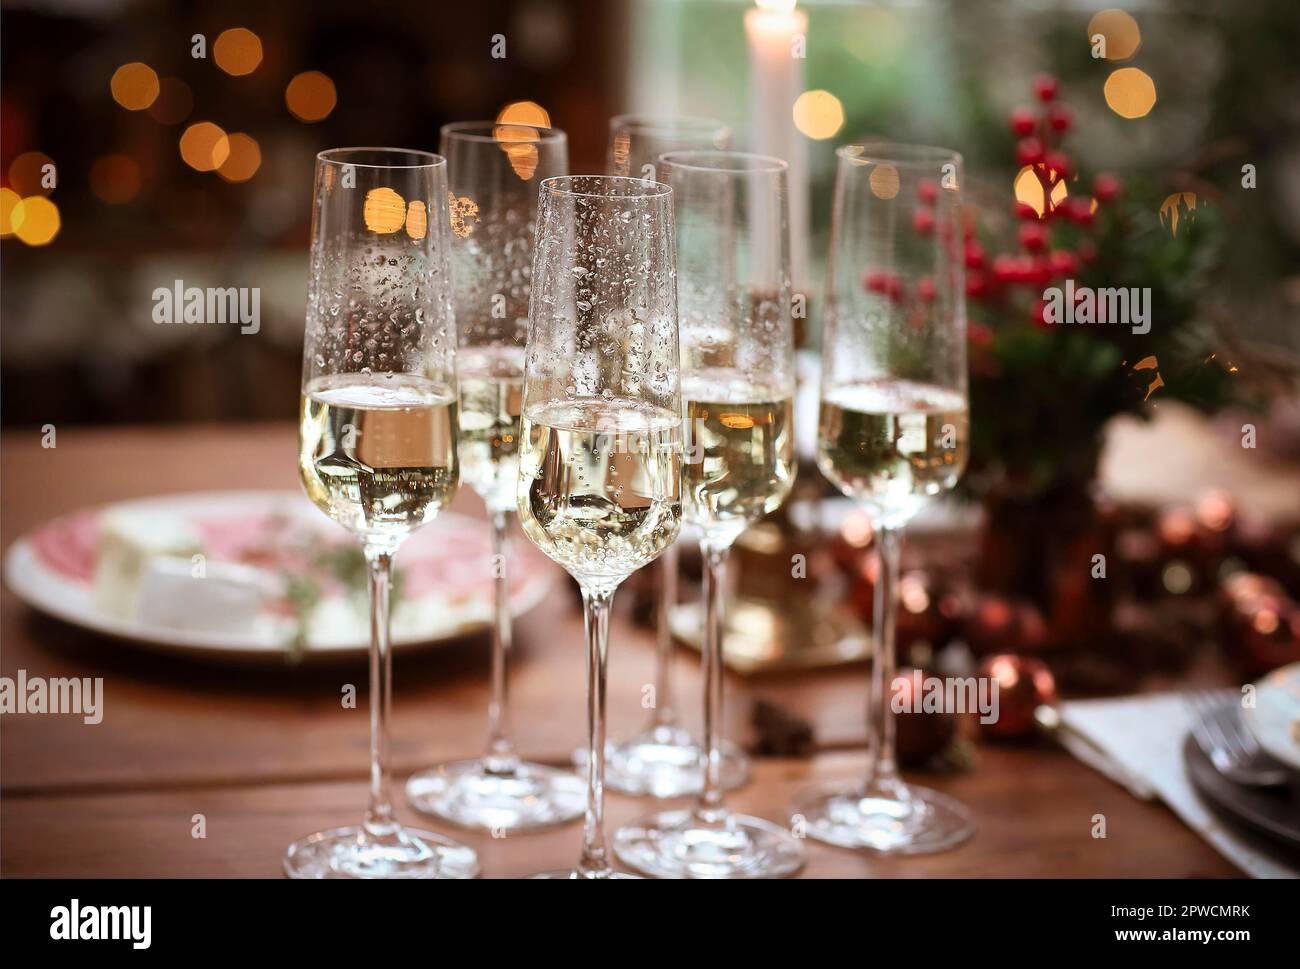 Set of champagne glasses on wooden table with candles against blurred wall with Christmas tree Stock Photo